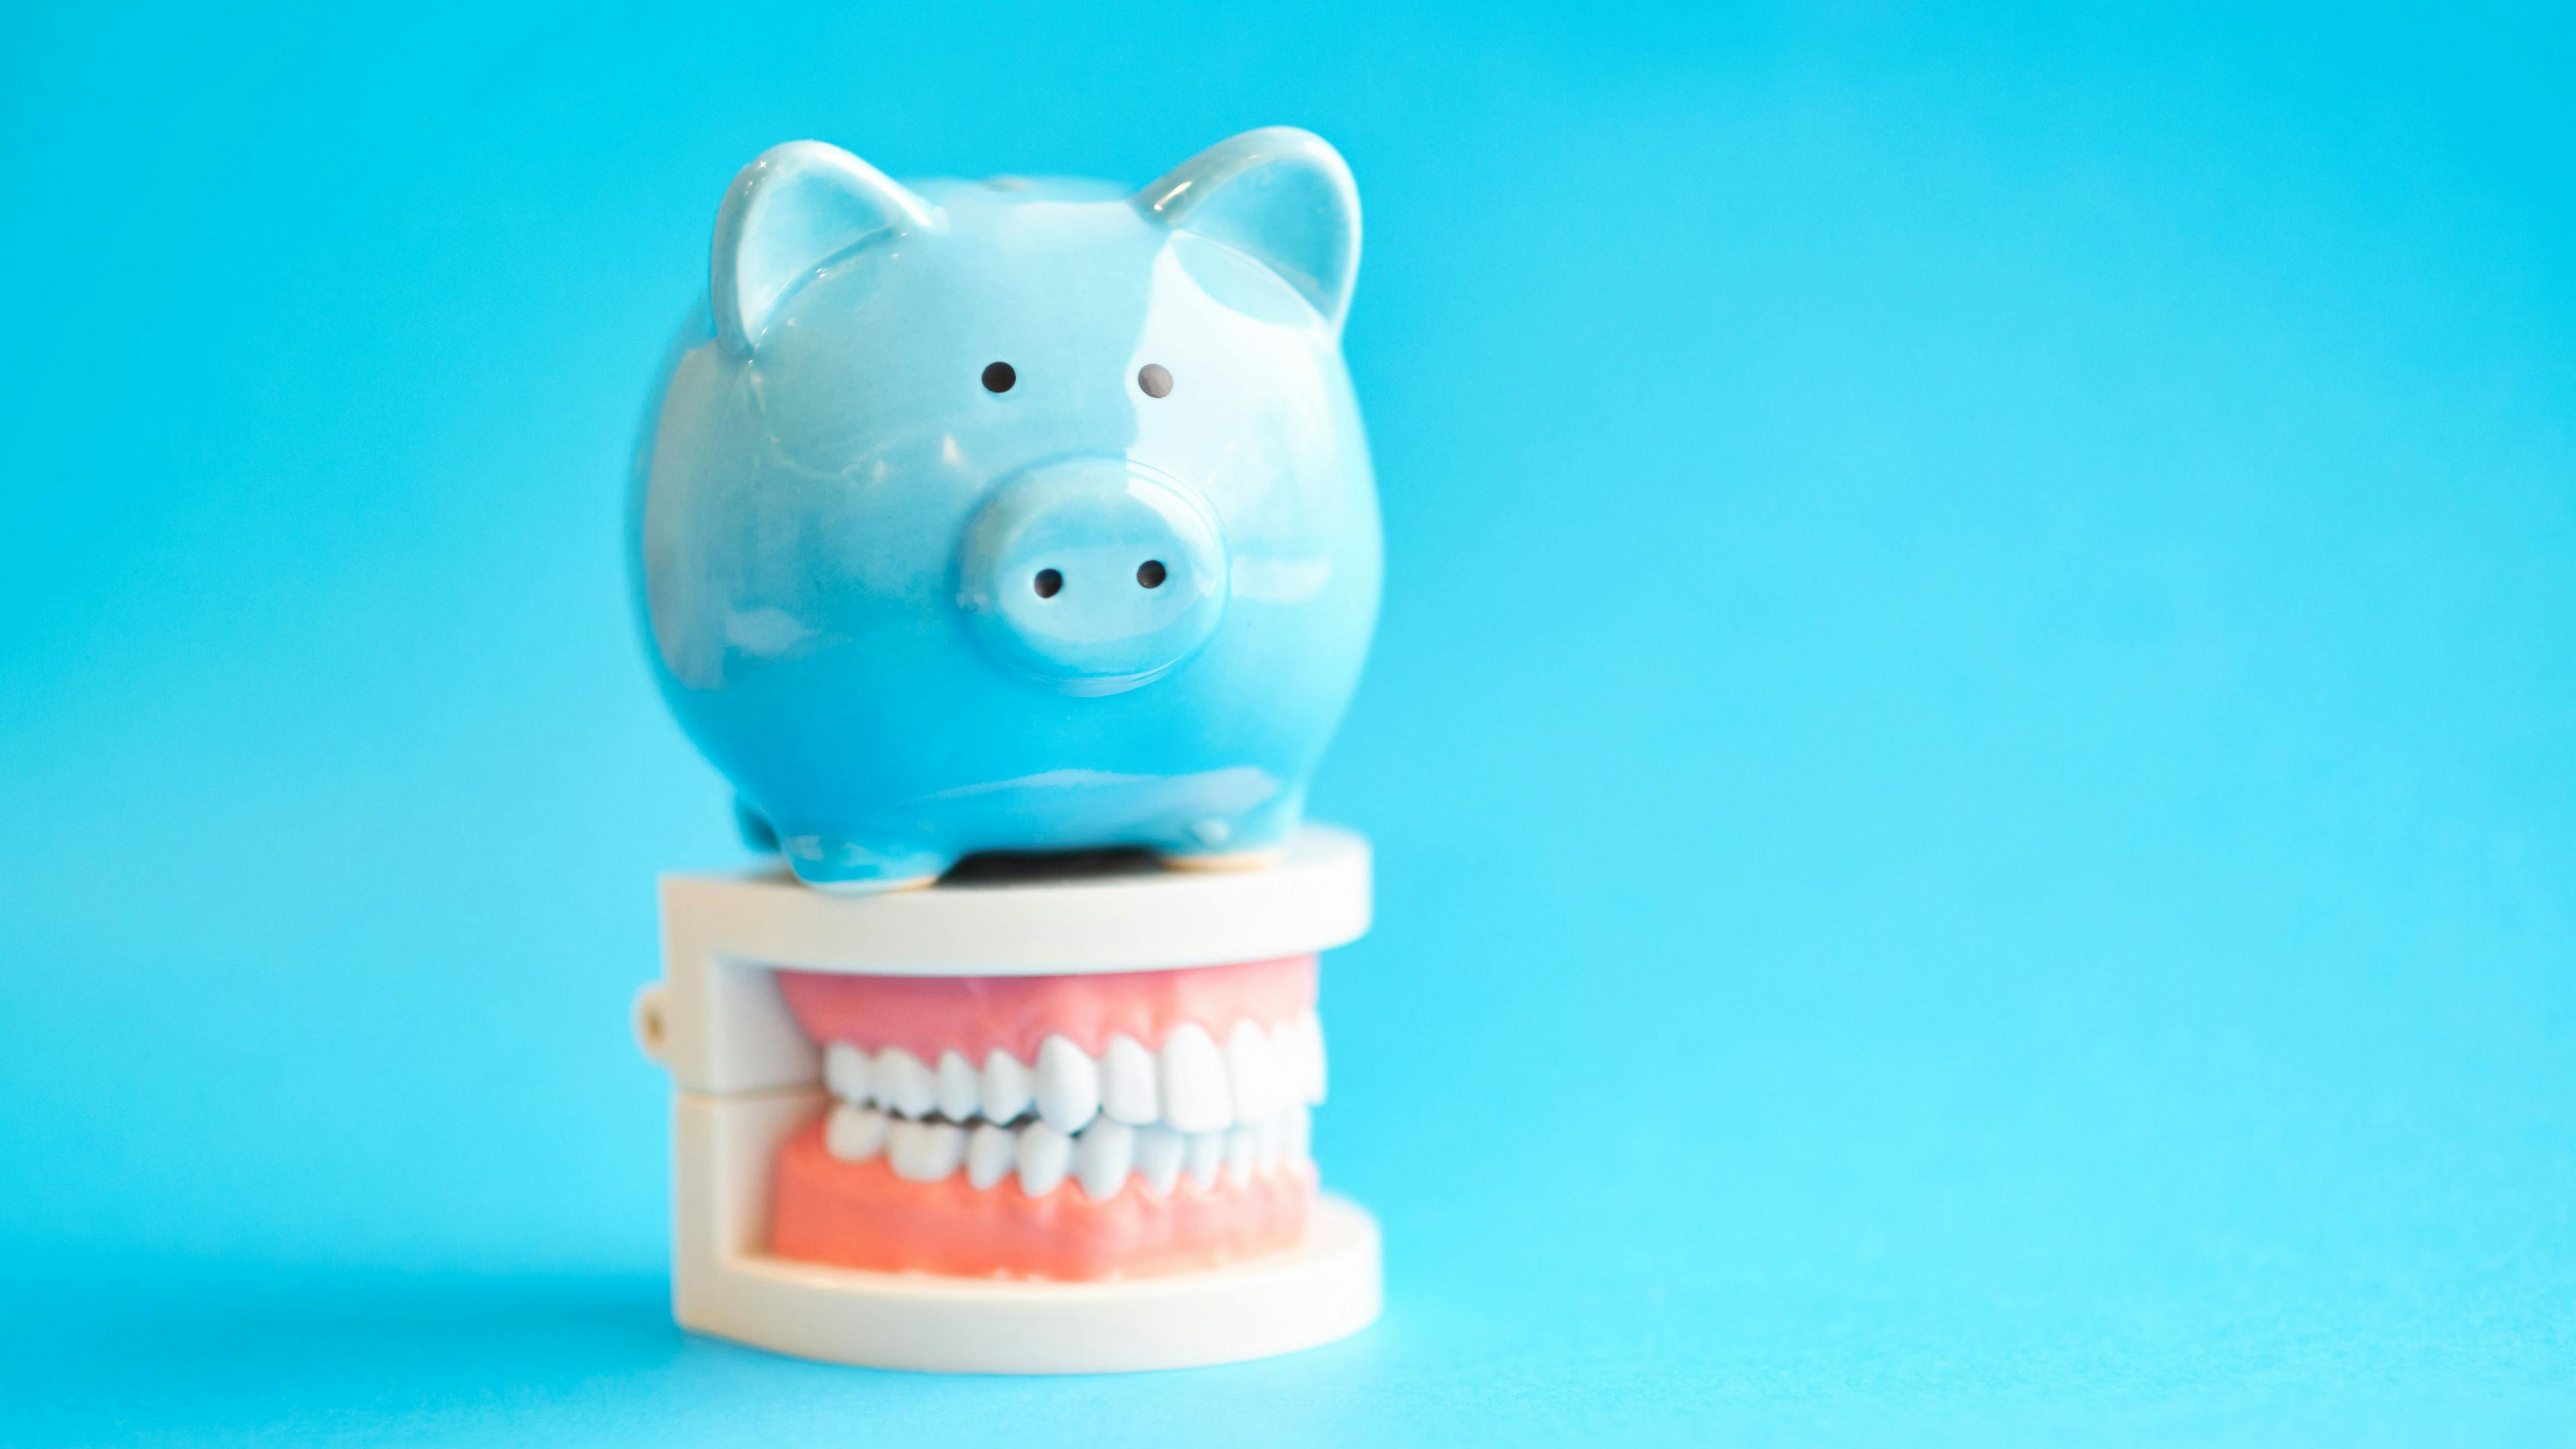 Oral and Dental Health is Crucial. But Access to Coverage is Spotty.